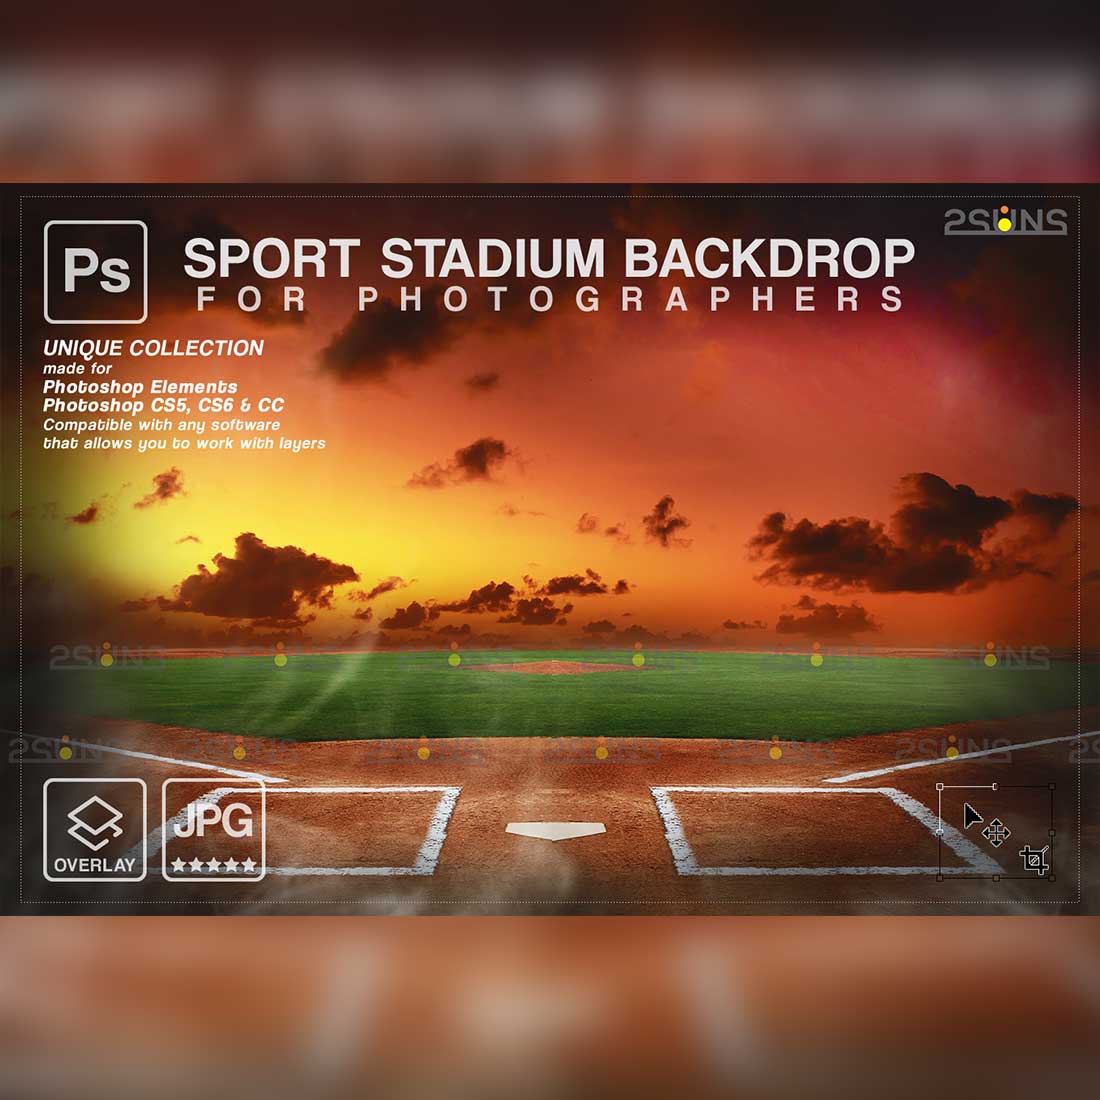 Baseball Modern And Stylish Backdrop Sports Digital Background Preview Image.